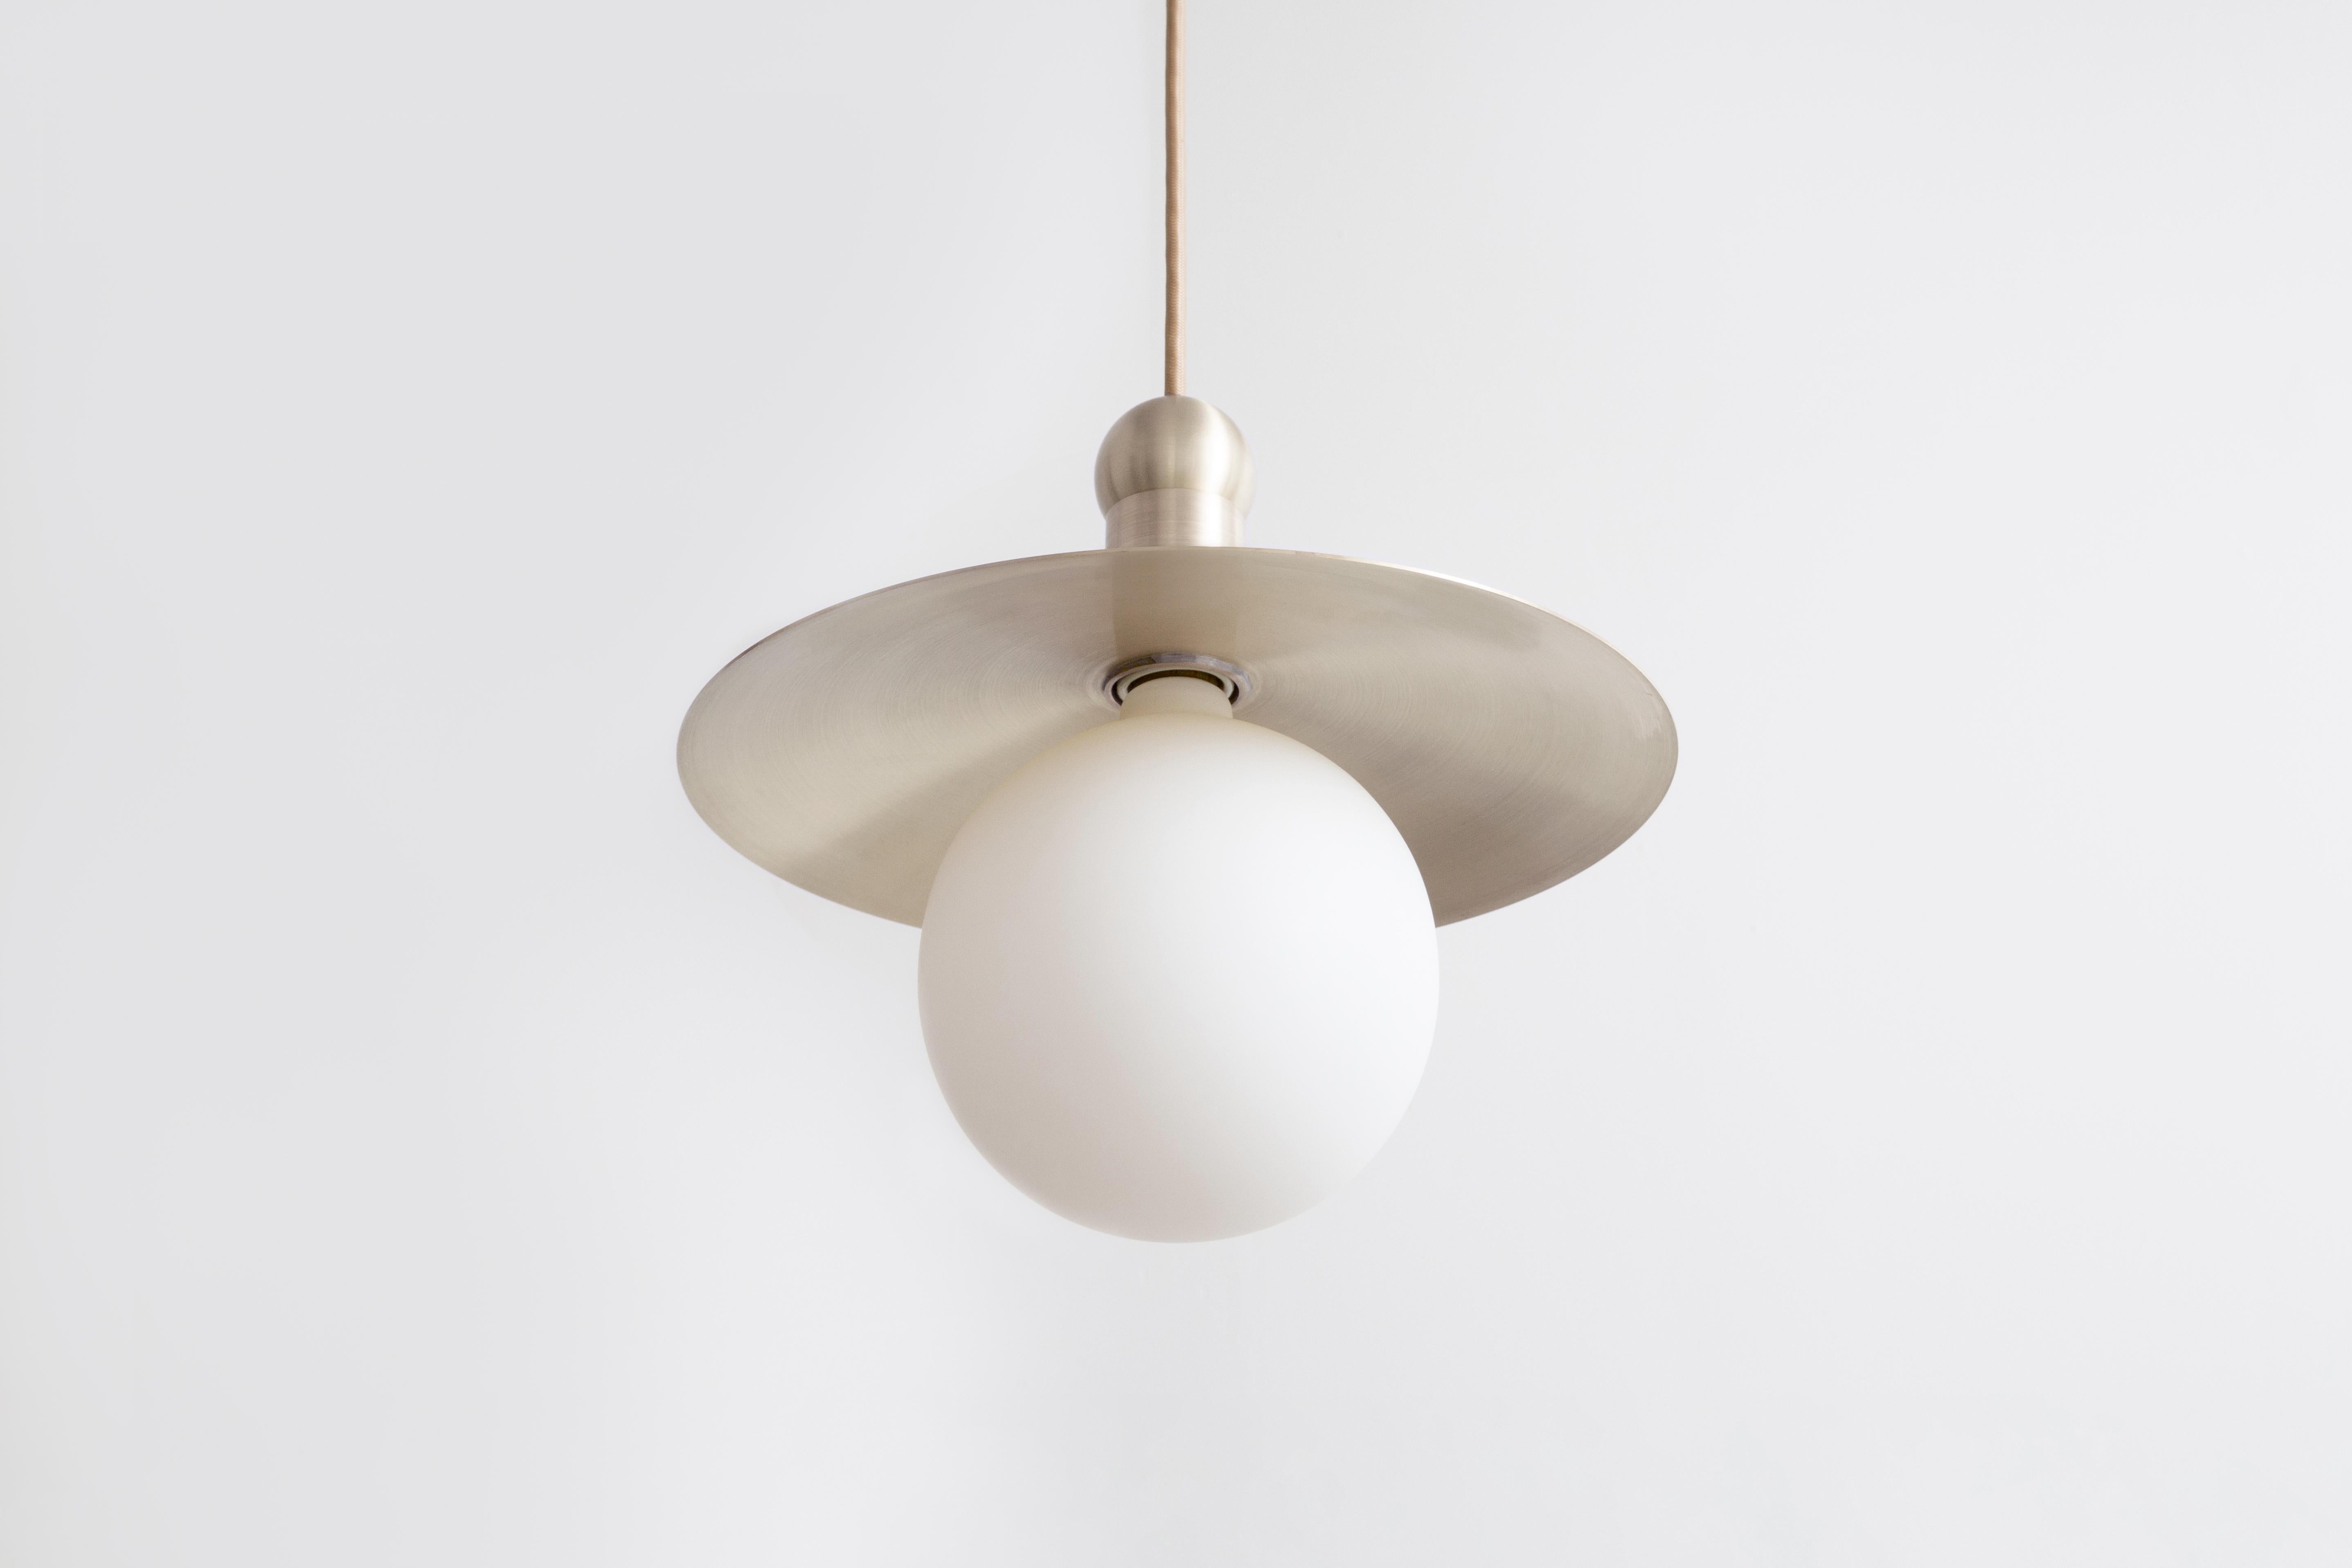 The Helios cord pendant positions a single glowing bulb against a stationary radiant dish, exploring the scale and illumination of an early American candle via the form of a traditional down-light pendant. With rotund details, each pendant provides